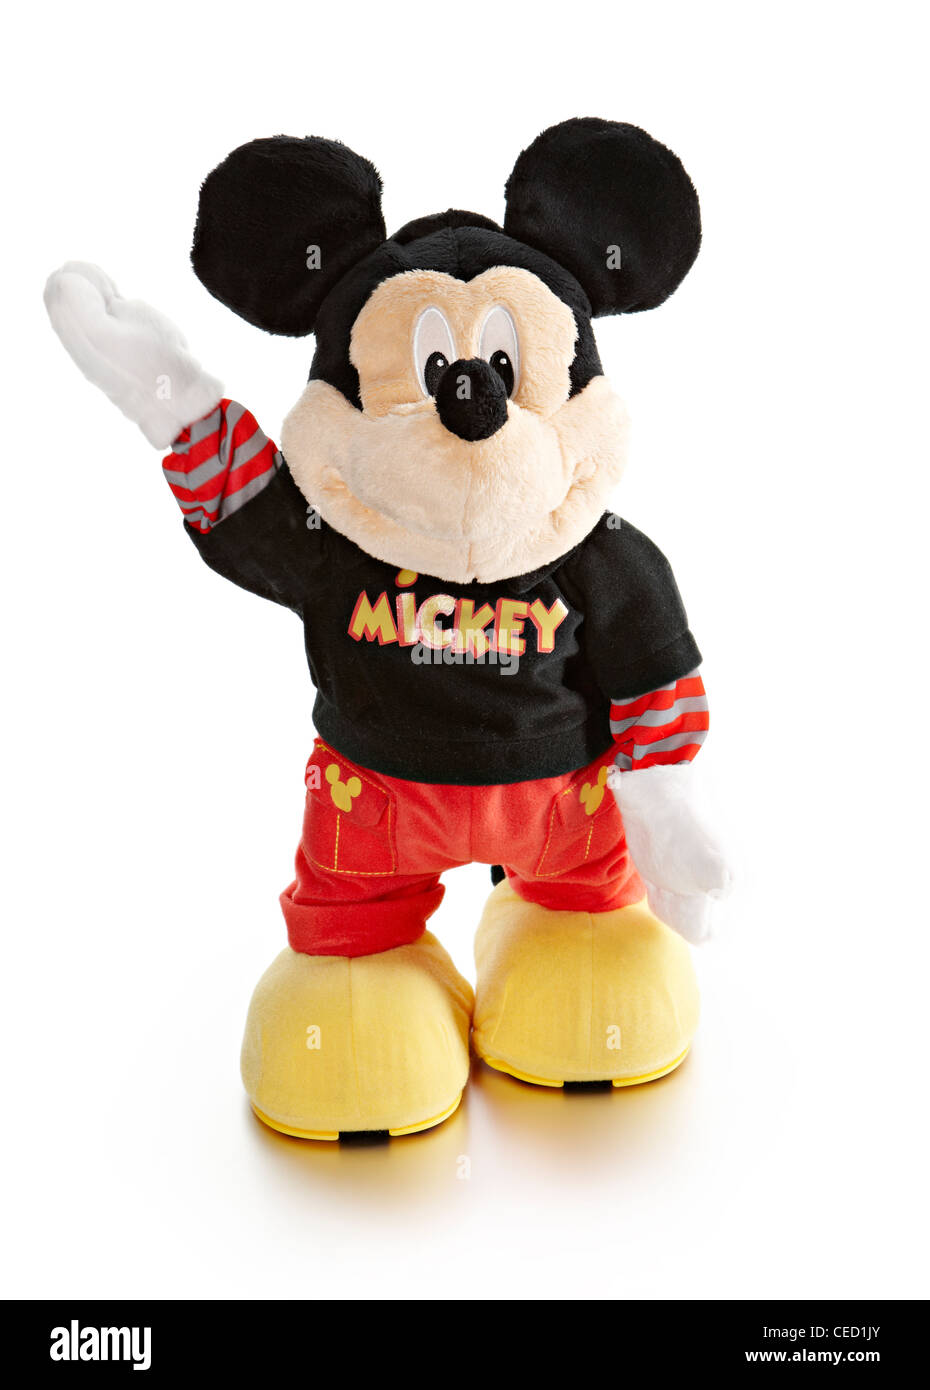 Mickey mouse toy Stock Photo